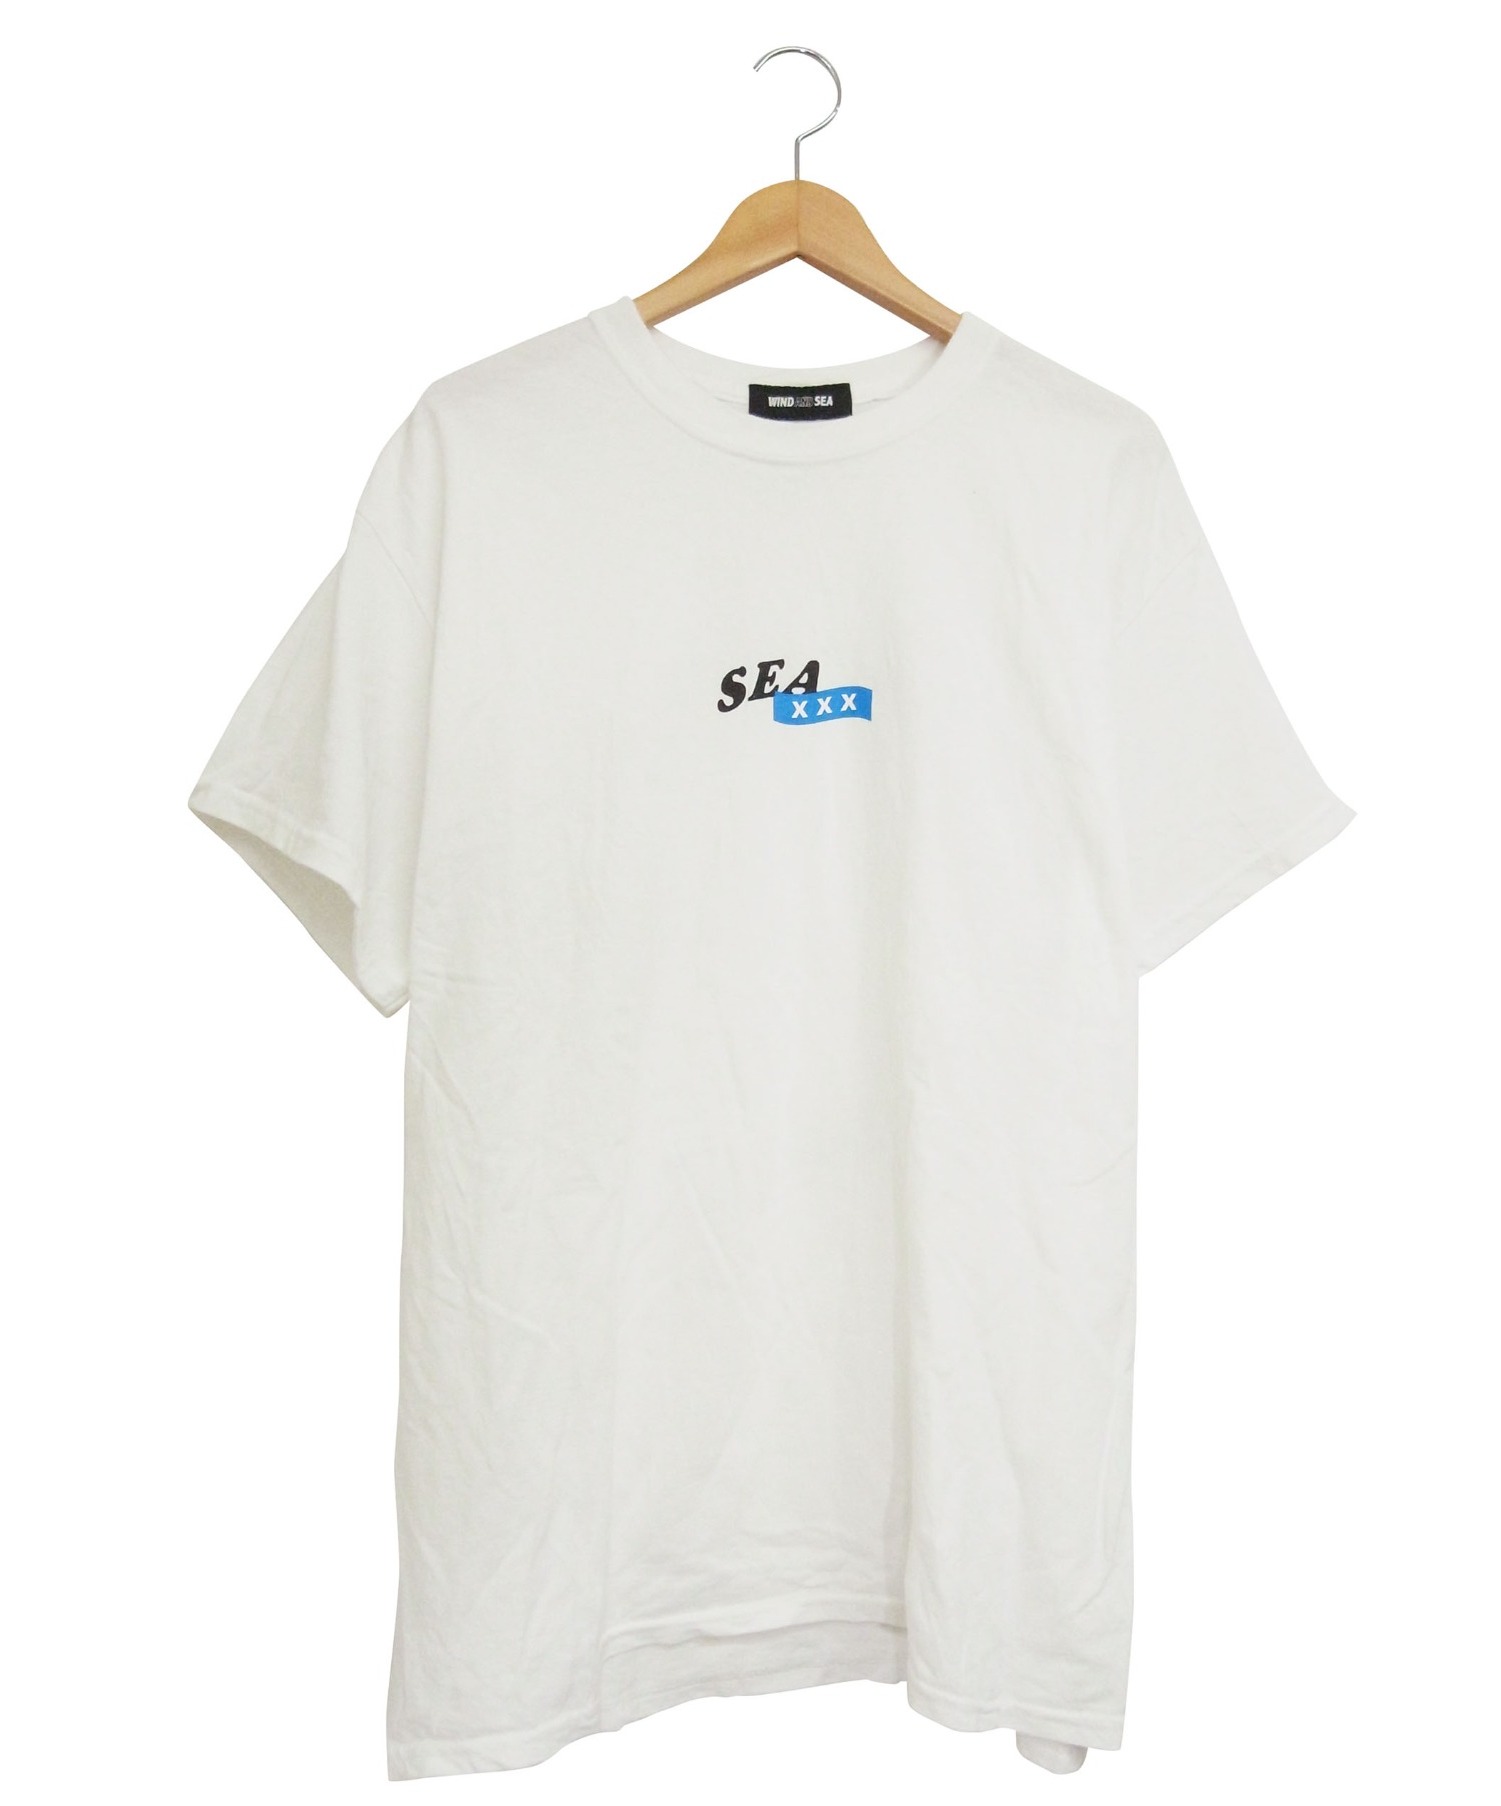 wind and sea god selection Tシャツ